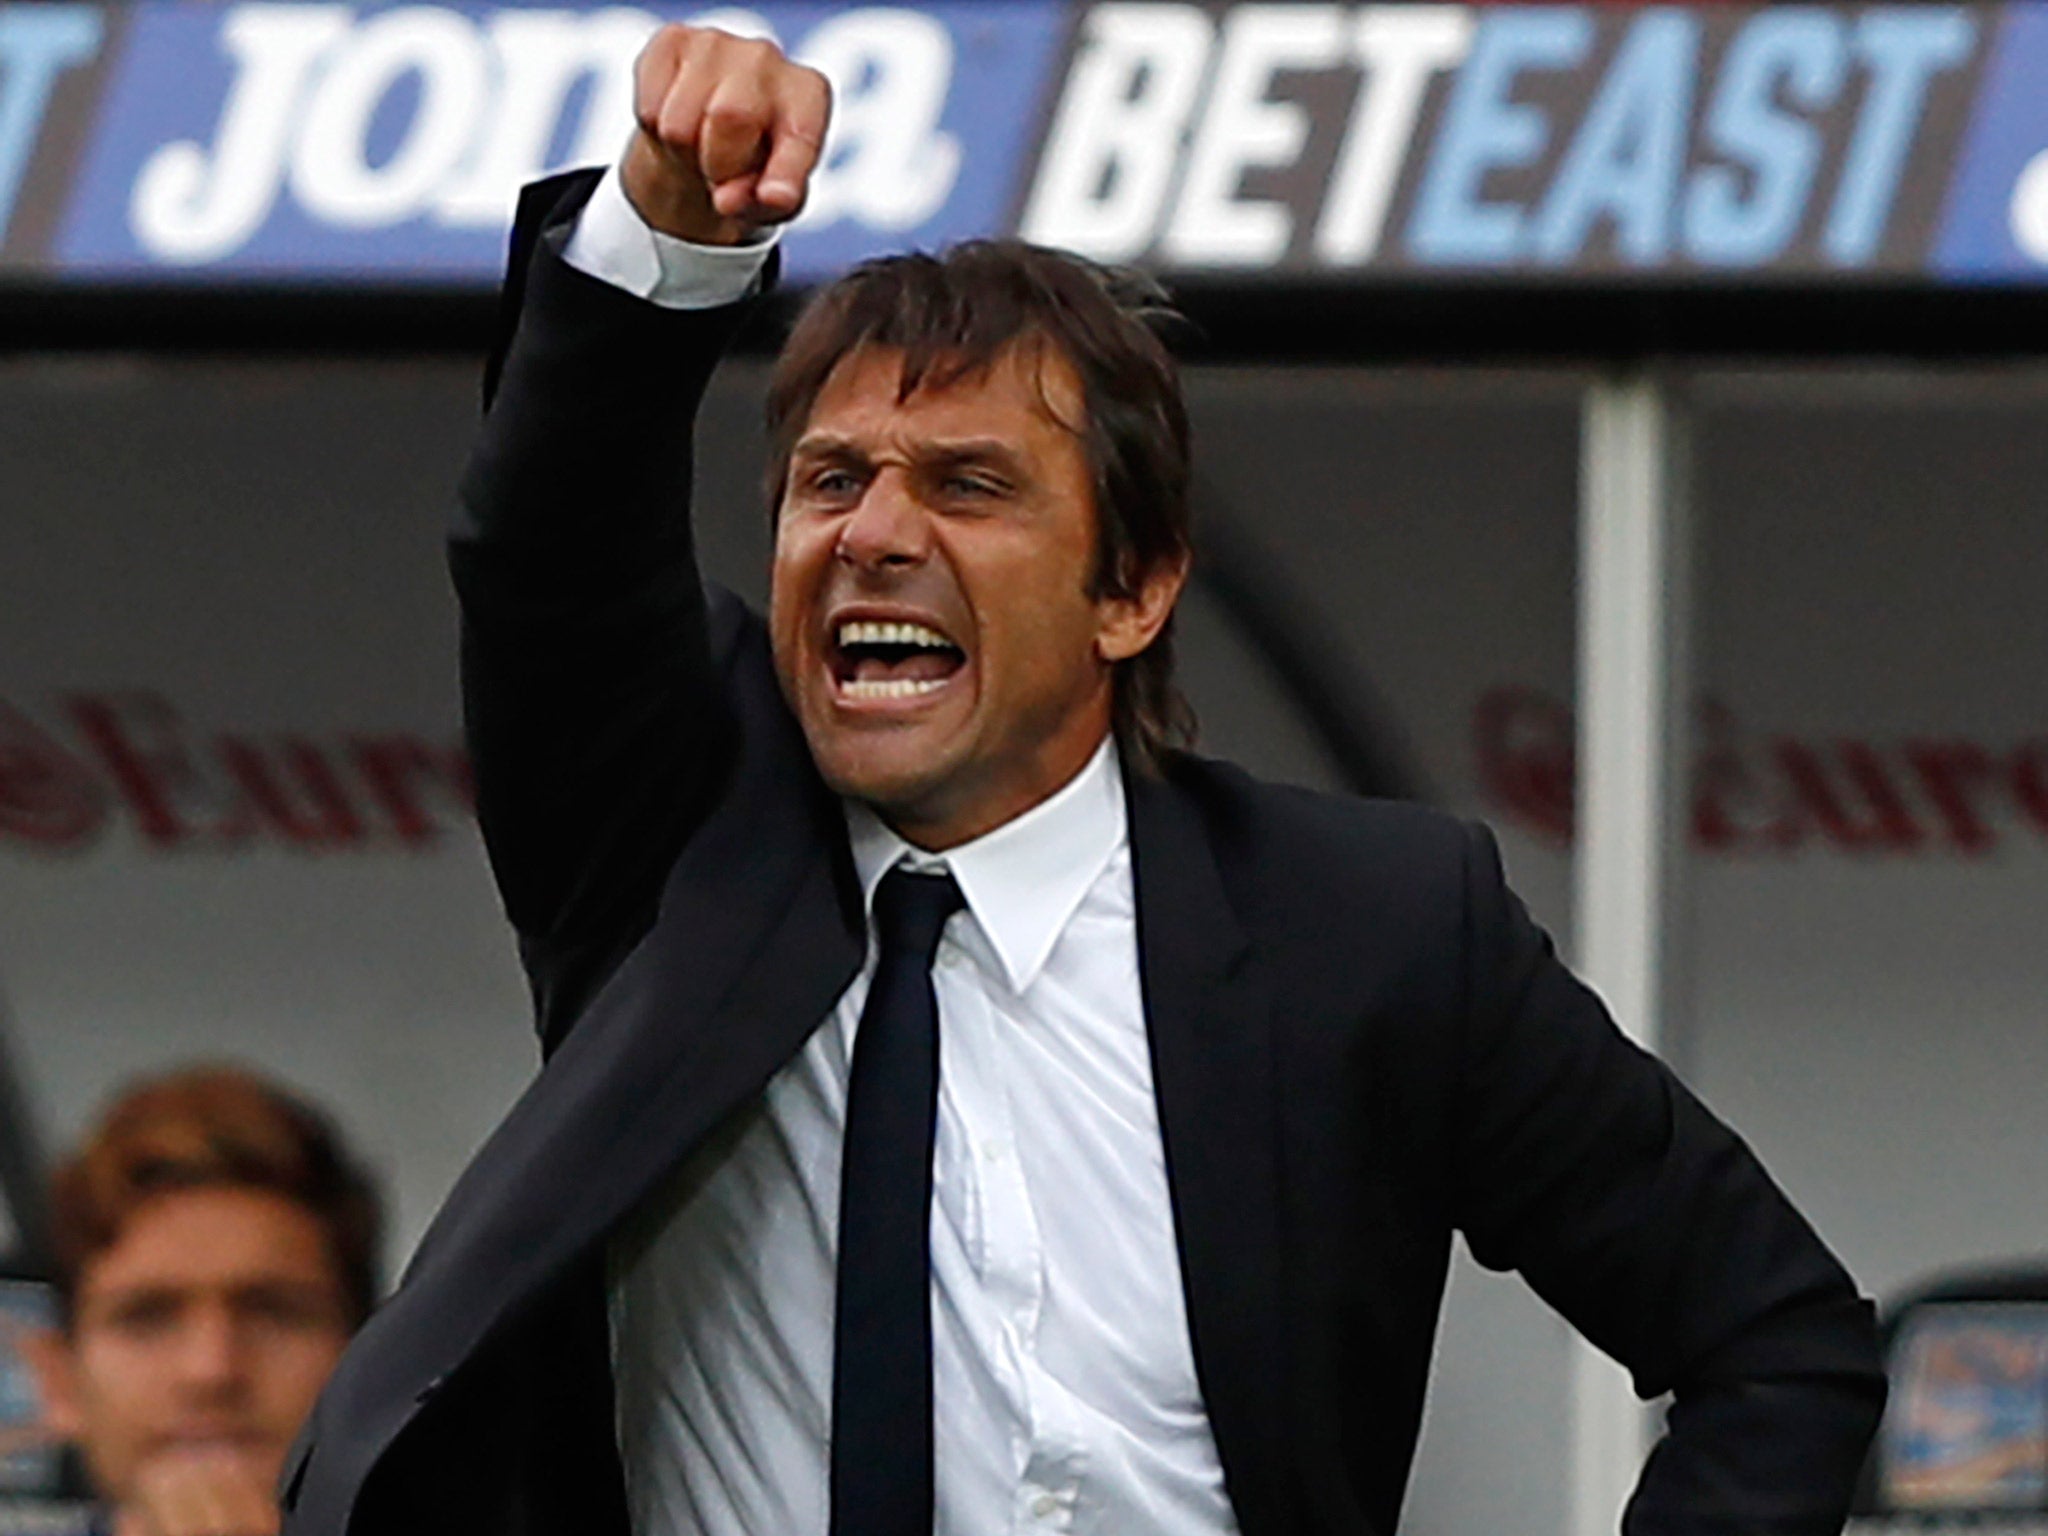 Antonio Conte takes charge of his fifth match as Chelsea manager against Liverpool